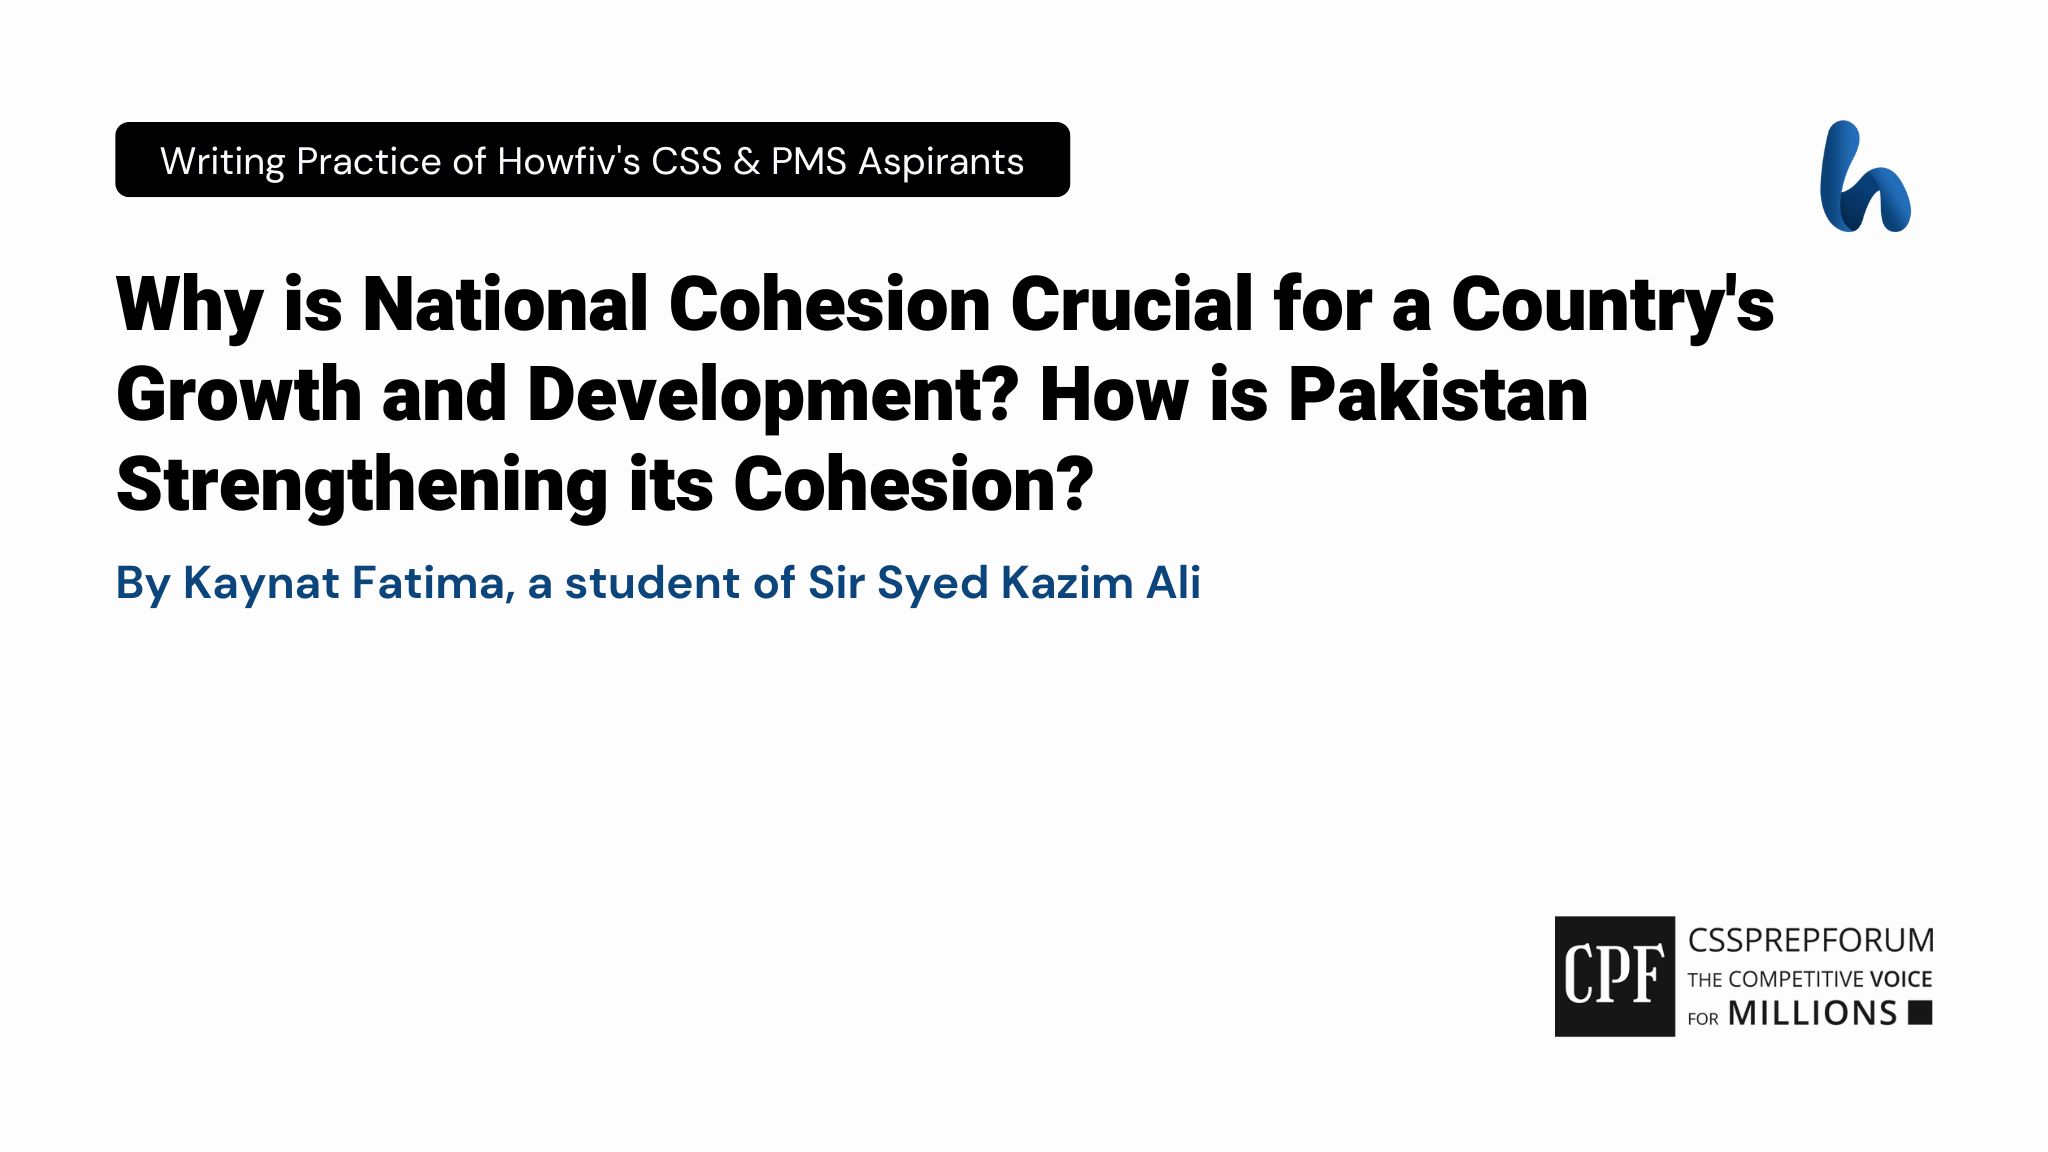 National Cohesion and Pakistan's Economic Growth by Kaynat Fatima